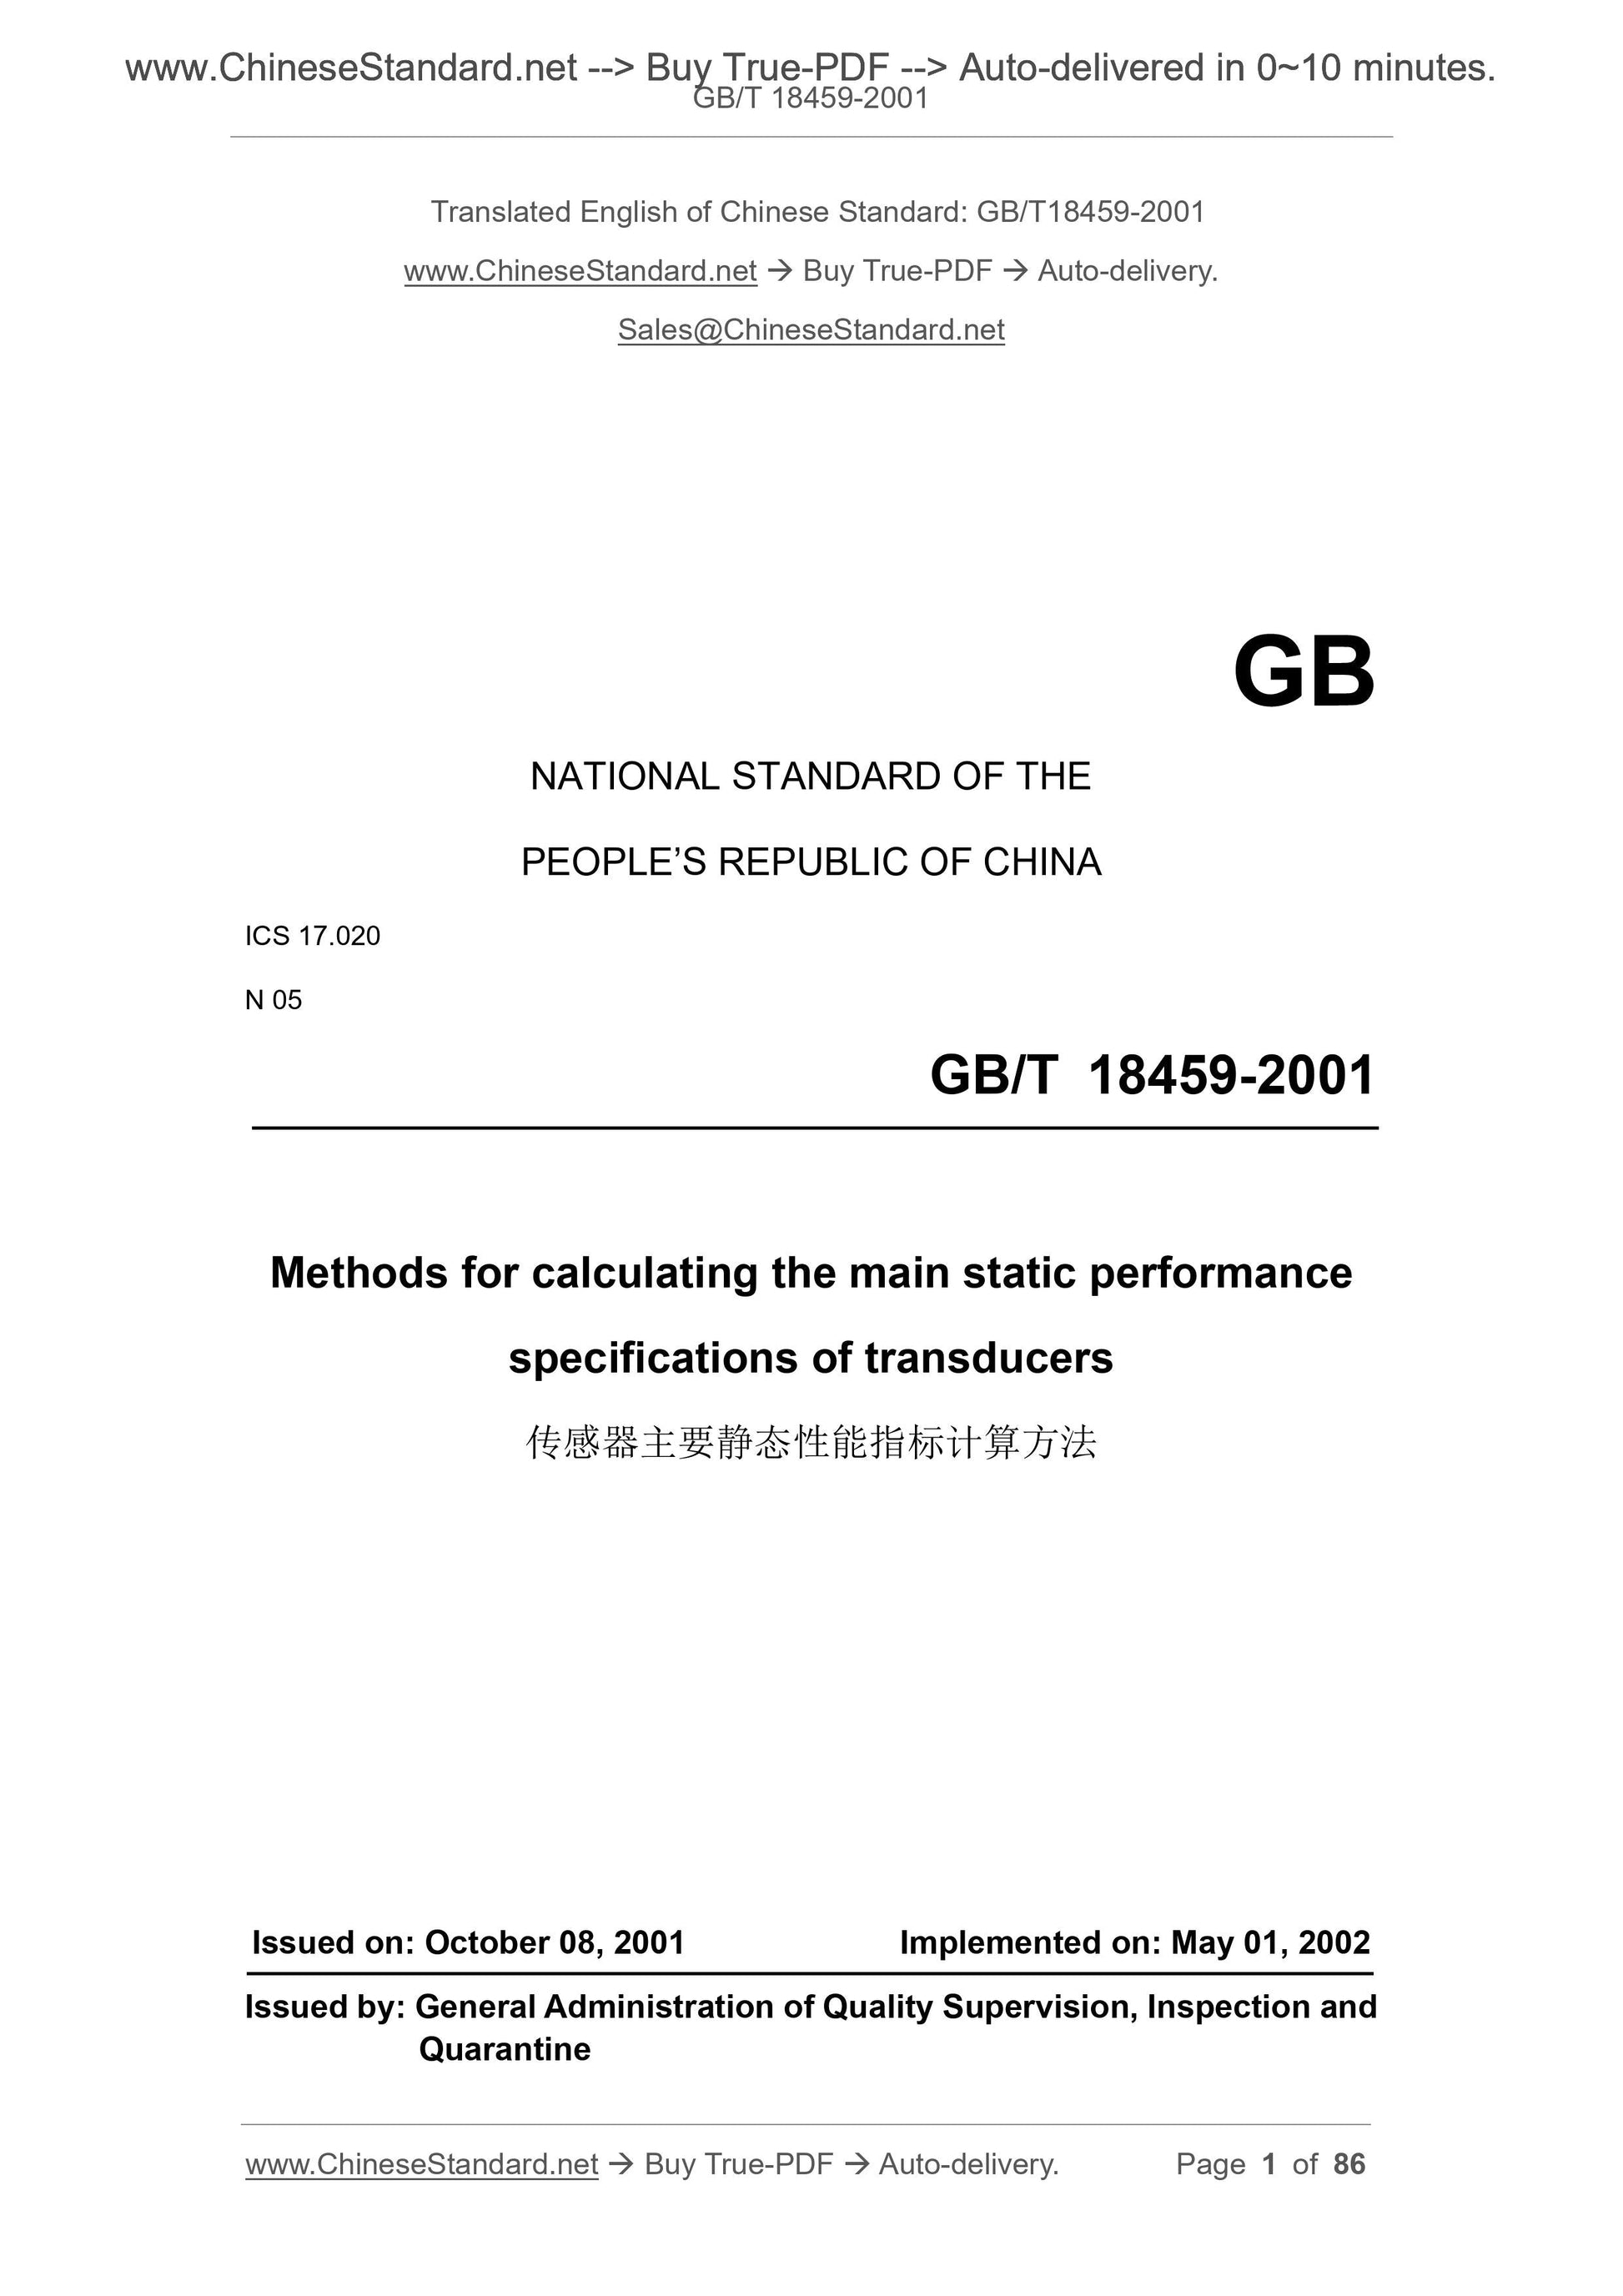 GB/T 18459-2001 Page 1